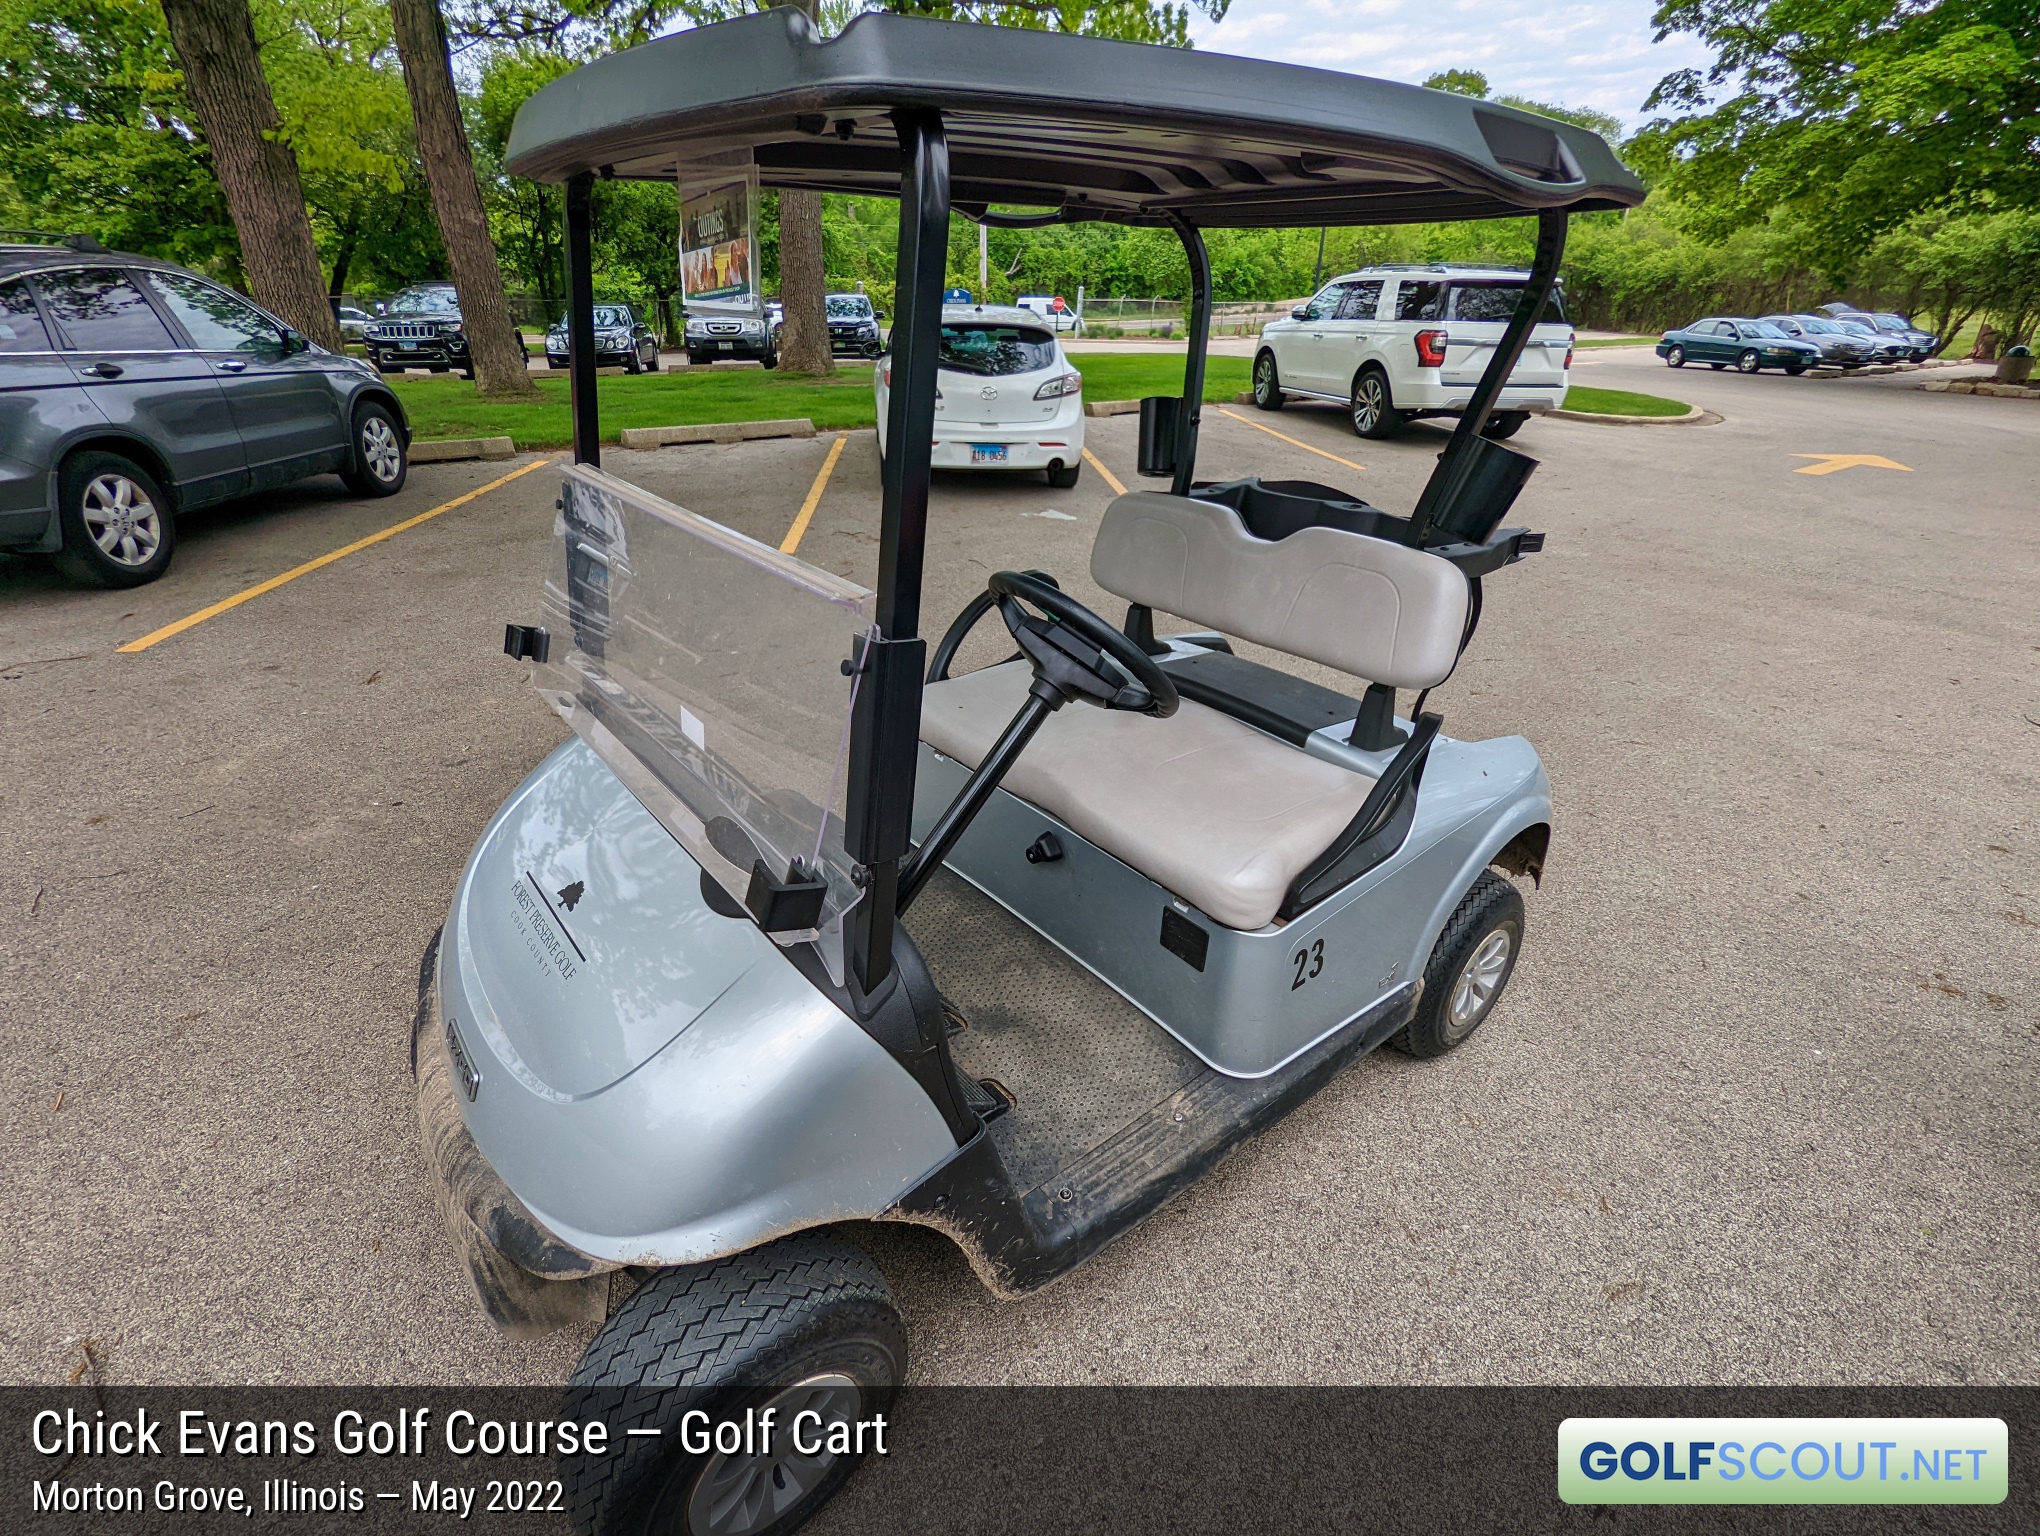 Photo of the golf carts at Chick Evans Golf Course in Morton Grove, Illinois. Standard motorized carts. They work fine. No GPS systems, but do you need one at Chick Evans?